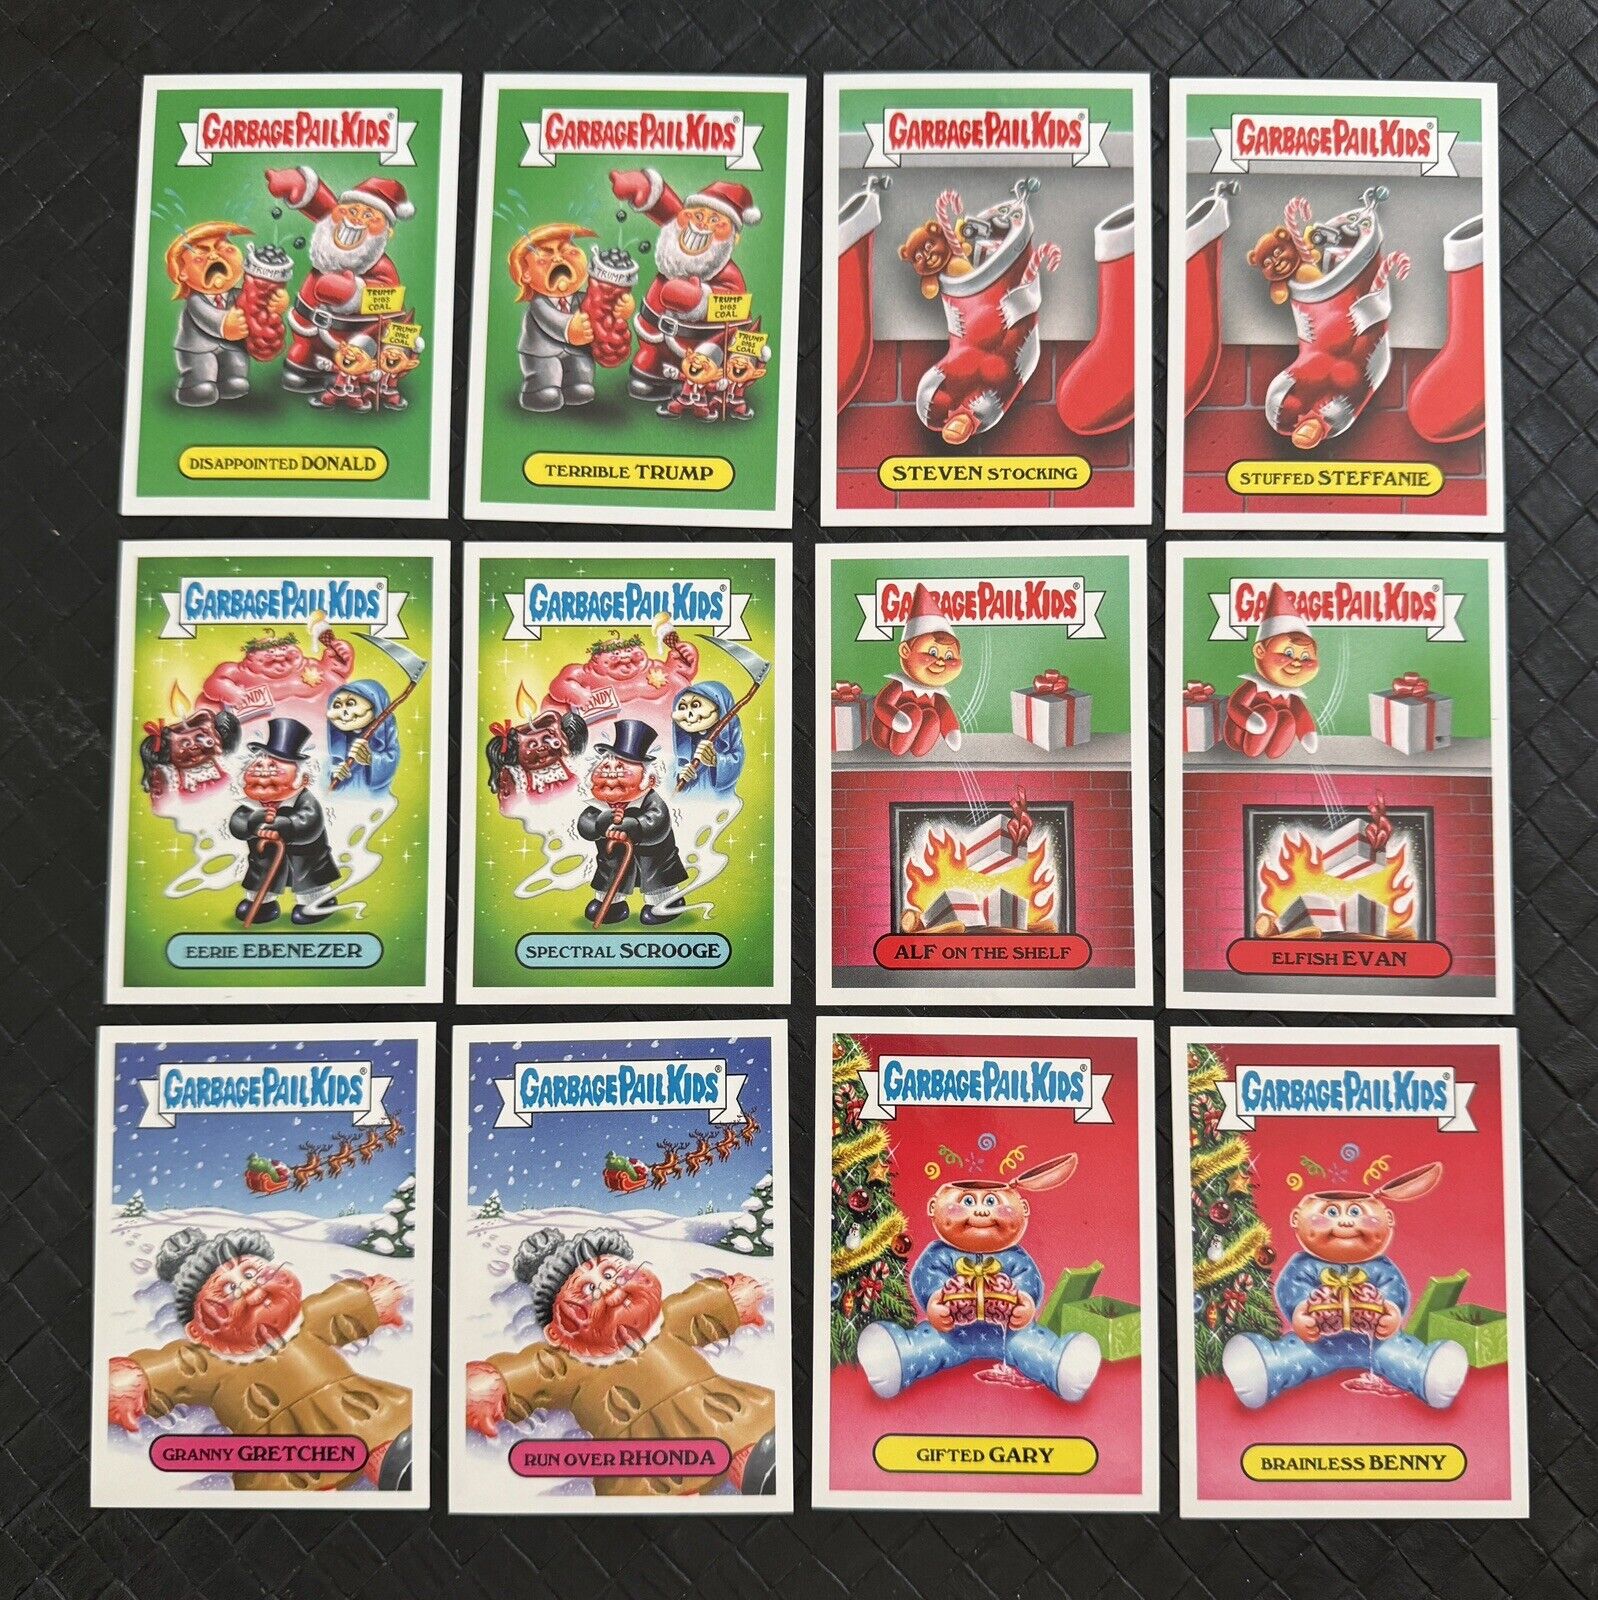 2016 Garbage Pail Kids CHRISTMAS STICKER SET (13 Cards). Only 279 Possible Sets